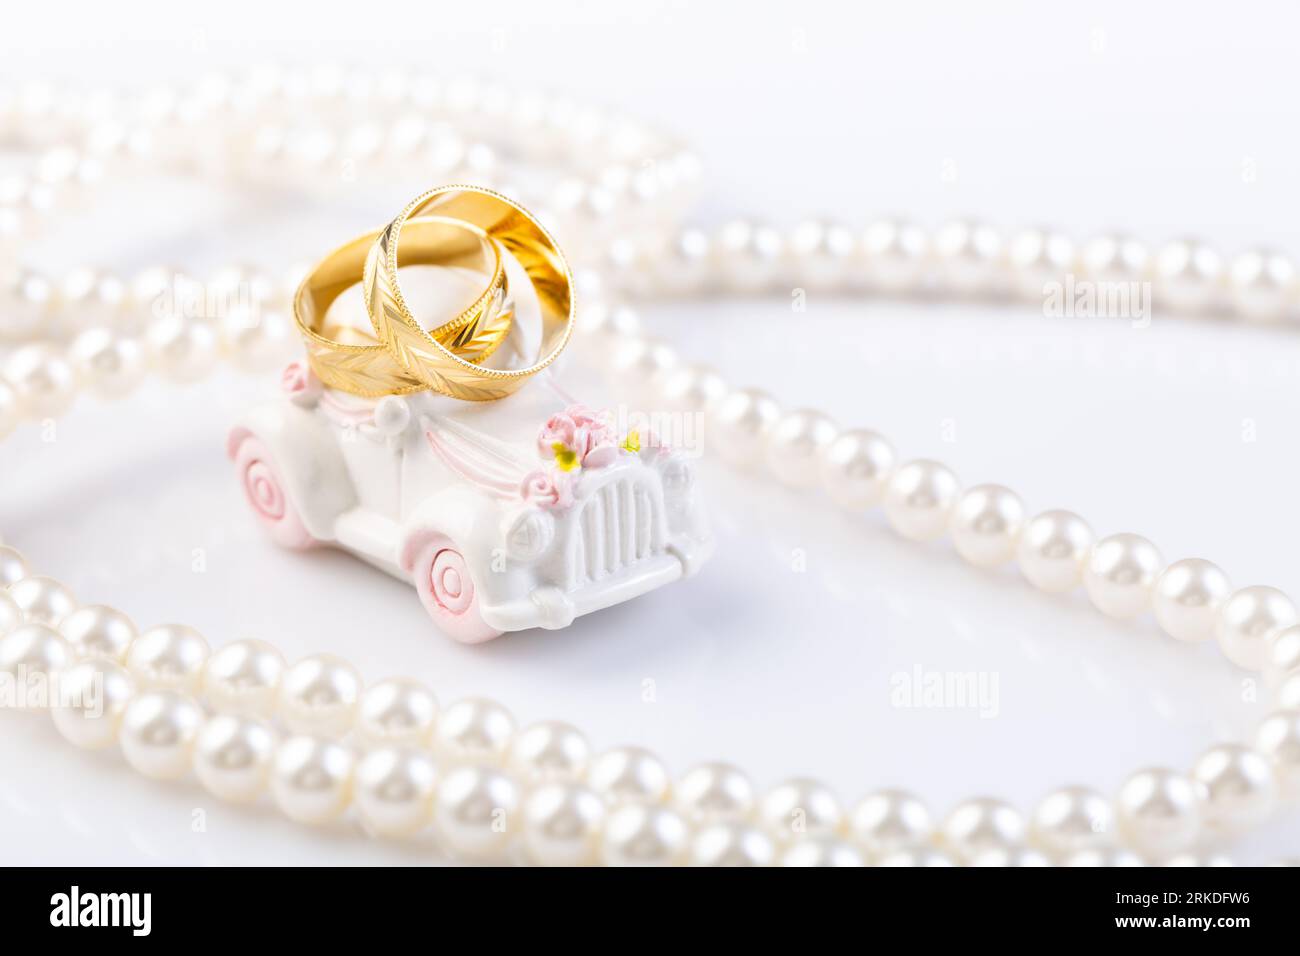 Two wedding rings on small vintage car with pearl necklace. Stock Photo